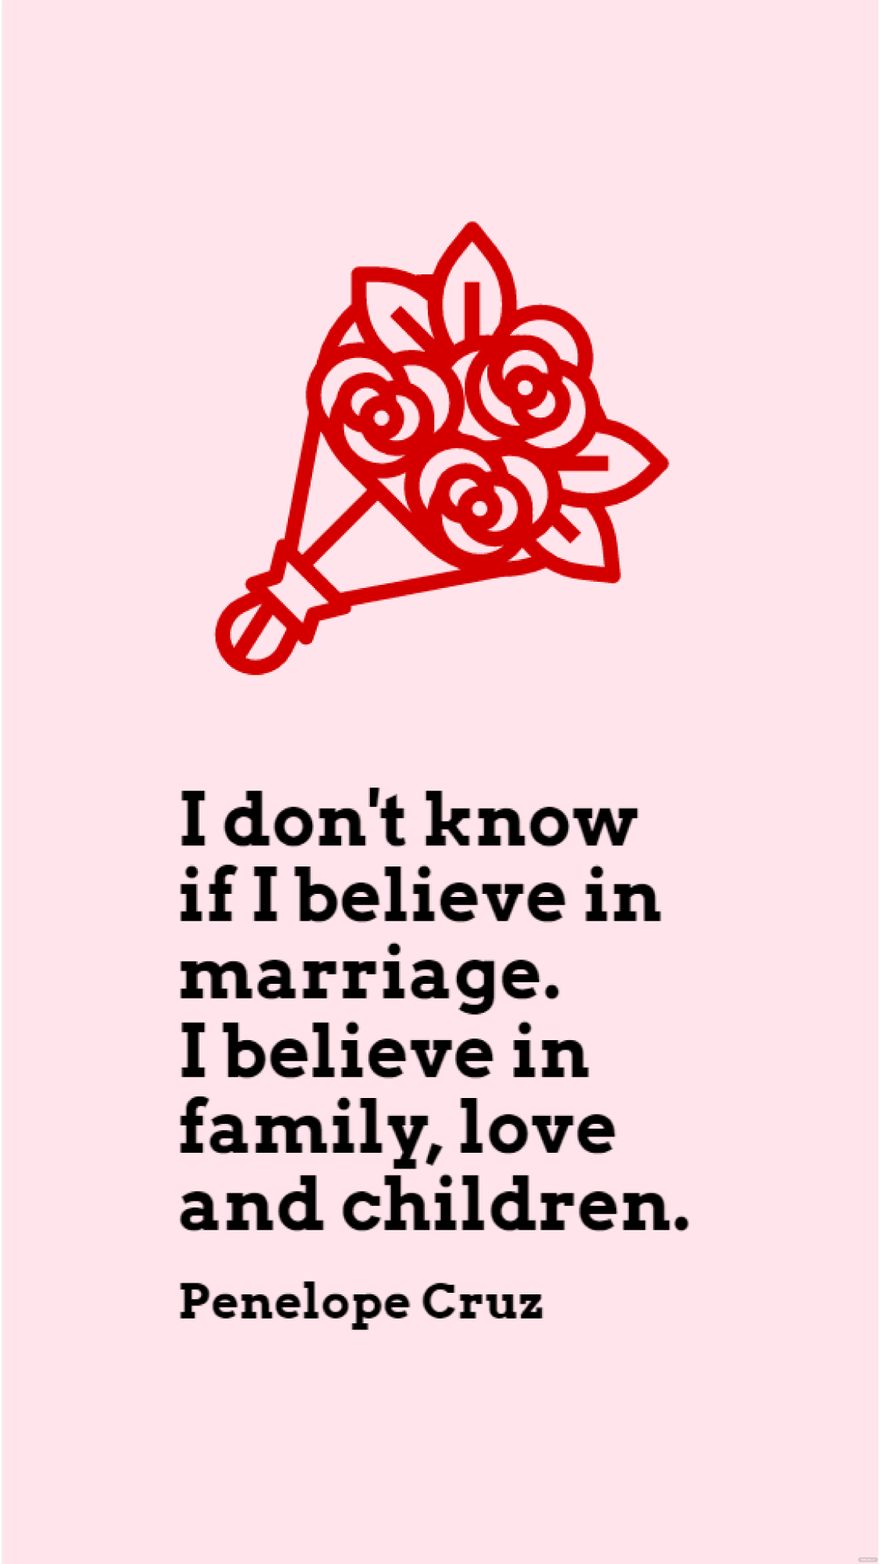 Penelope Cruz - I don't know if I believe in marriage. I believe in family, love and children.